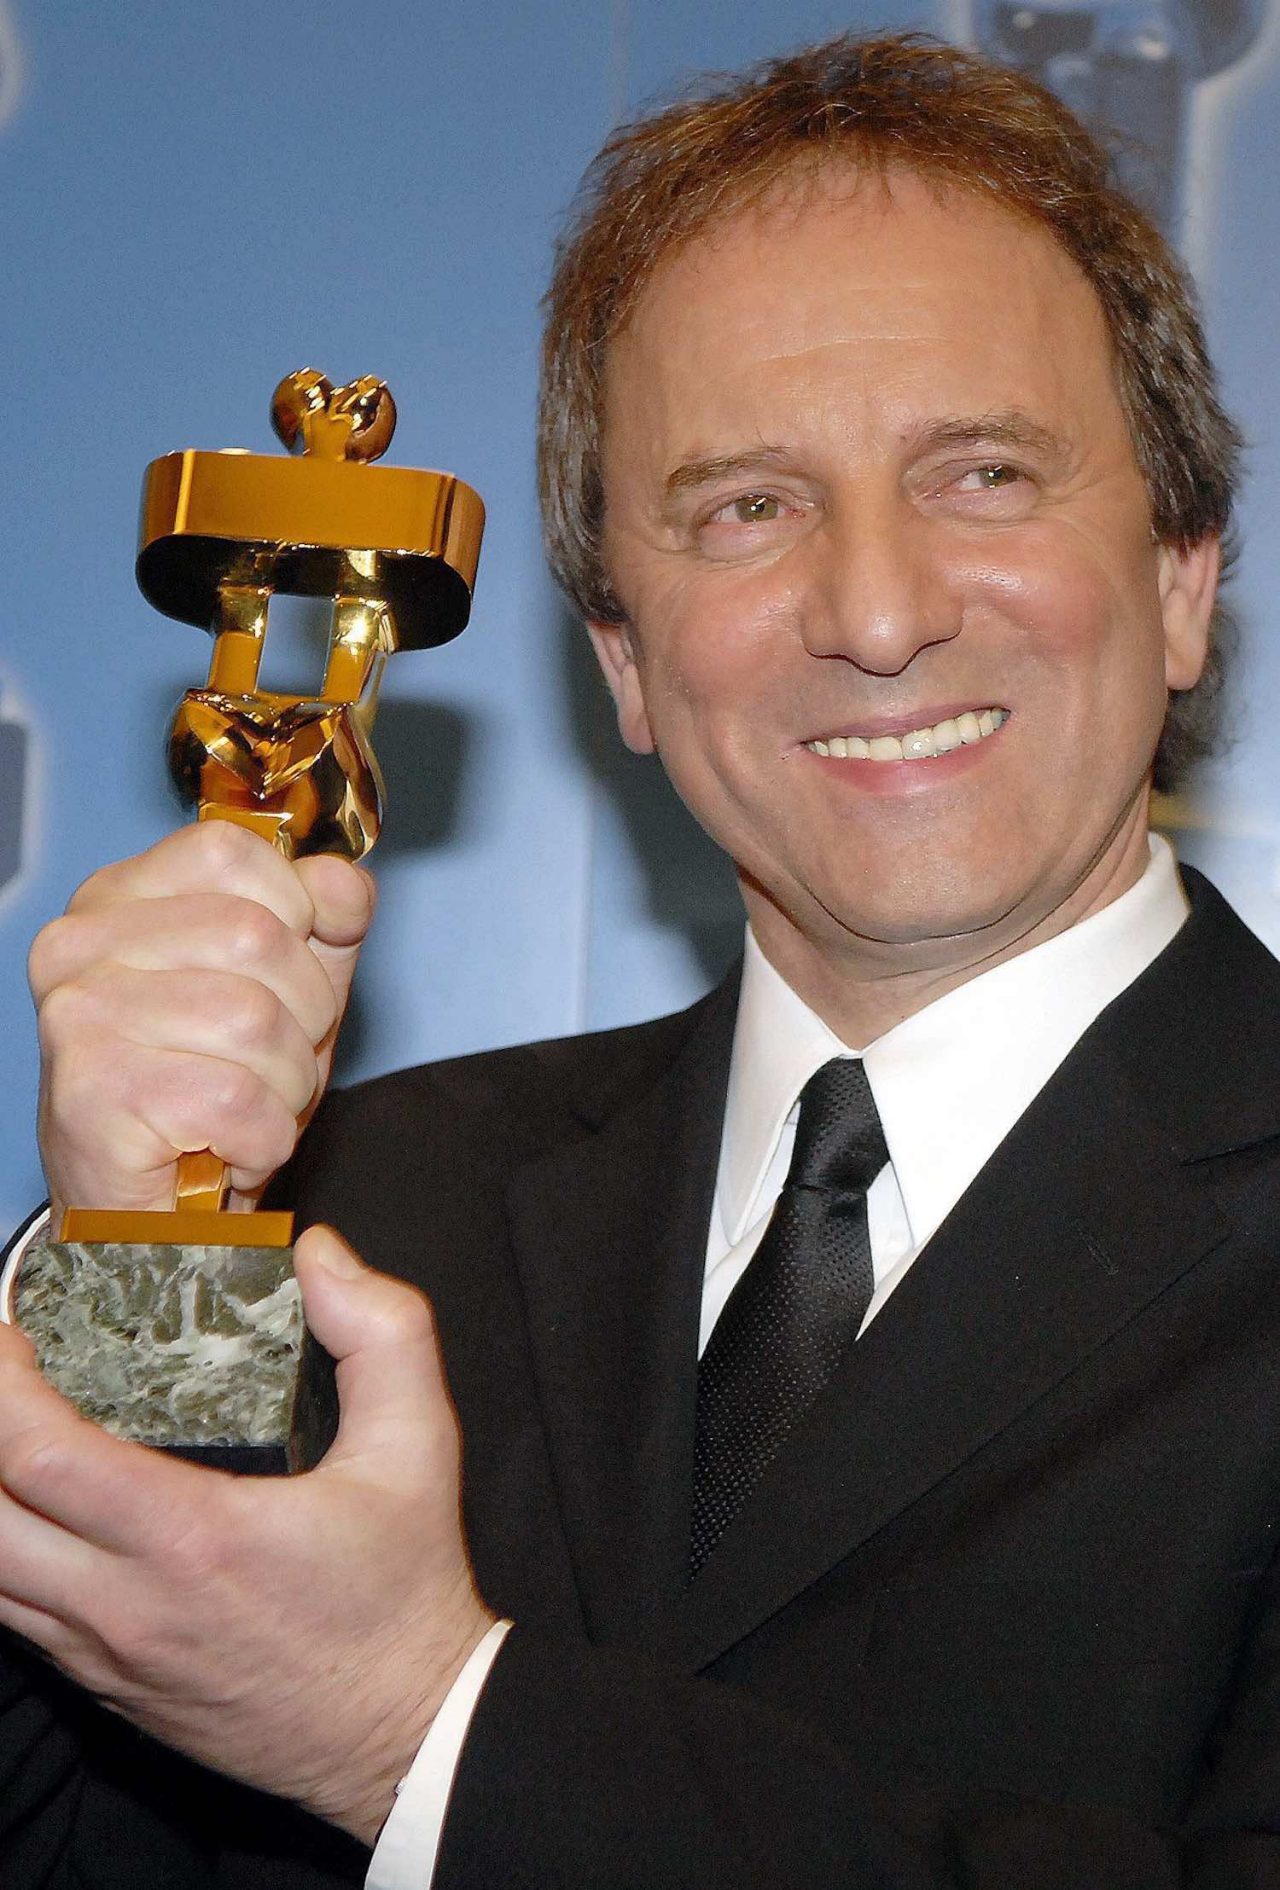 Actor Michel Cote poses for photographers at the 26th Annual Genie Awards in Toronto Monday, March 13, 2006. Cote won for best performance by an actor in a leading role in C.R.A.Z.Y. (CP PHOTO/Aaron Harris)